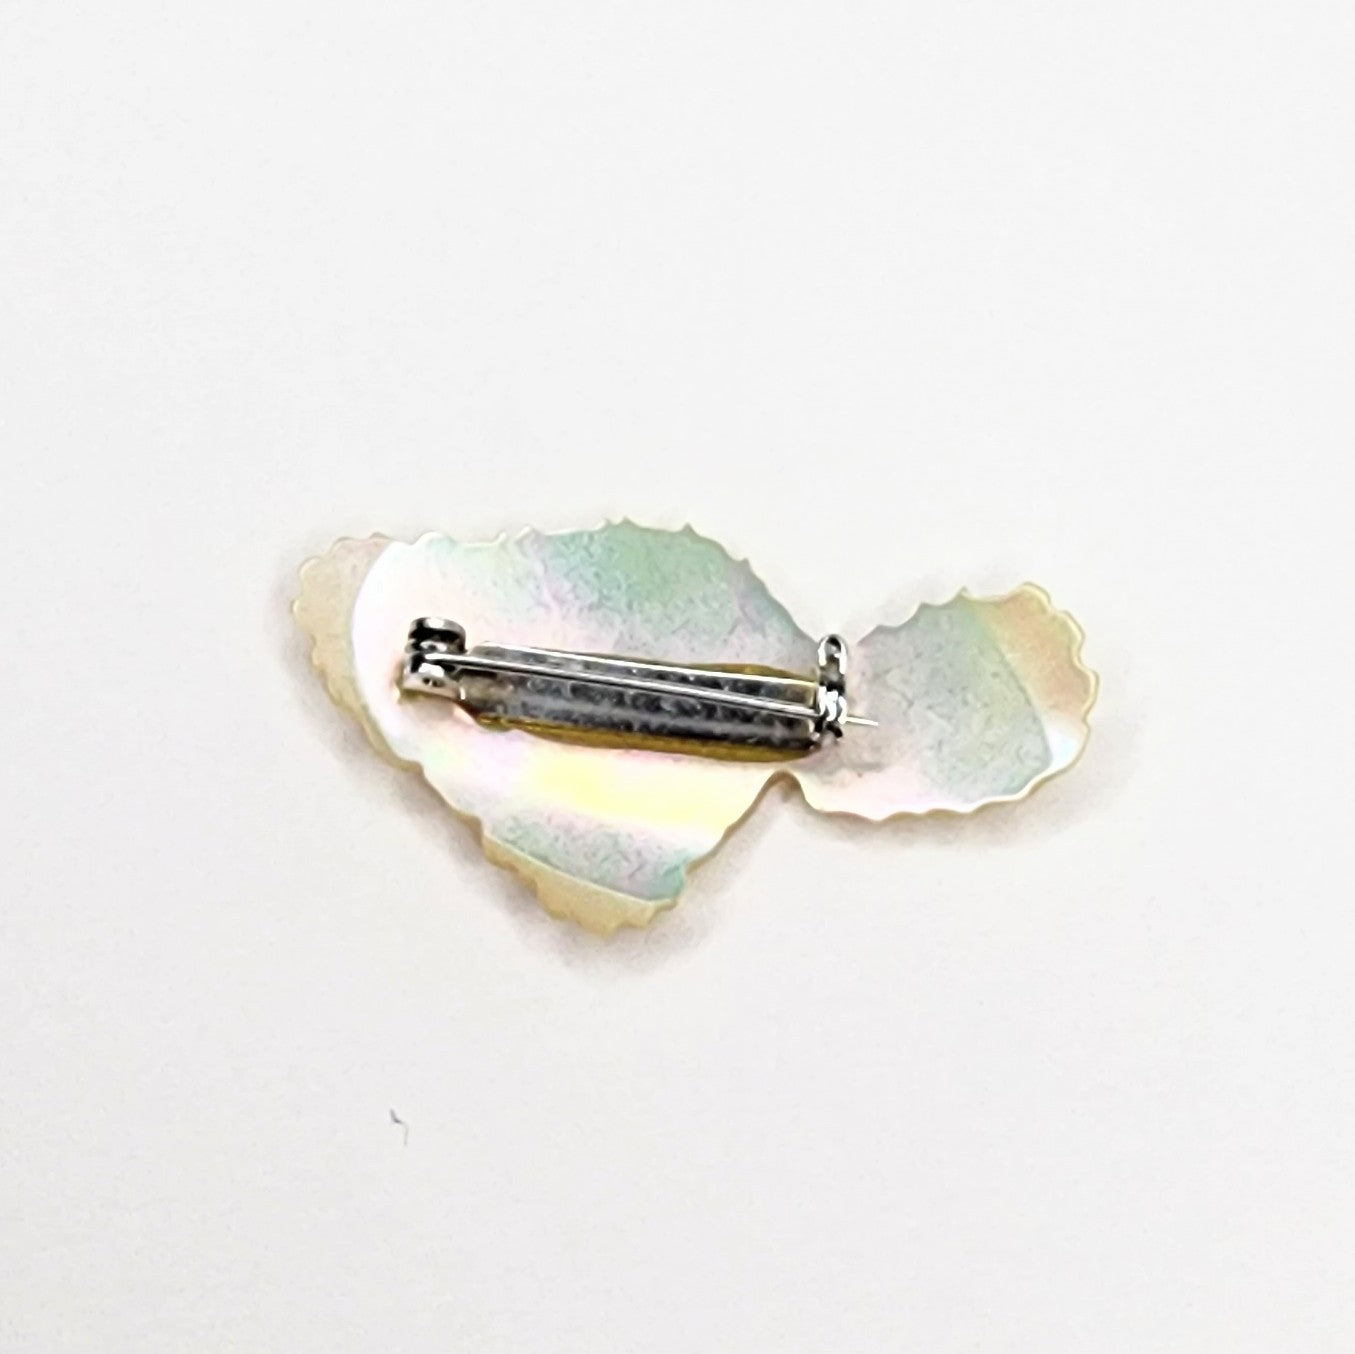 Vintage Maui Mother of Pearl Pin Brooch